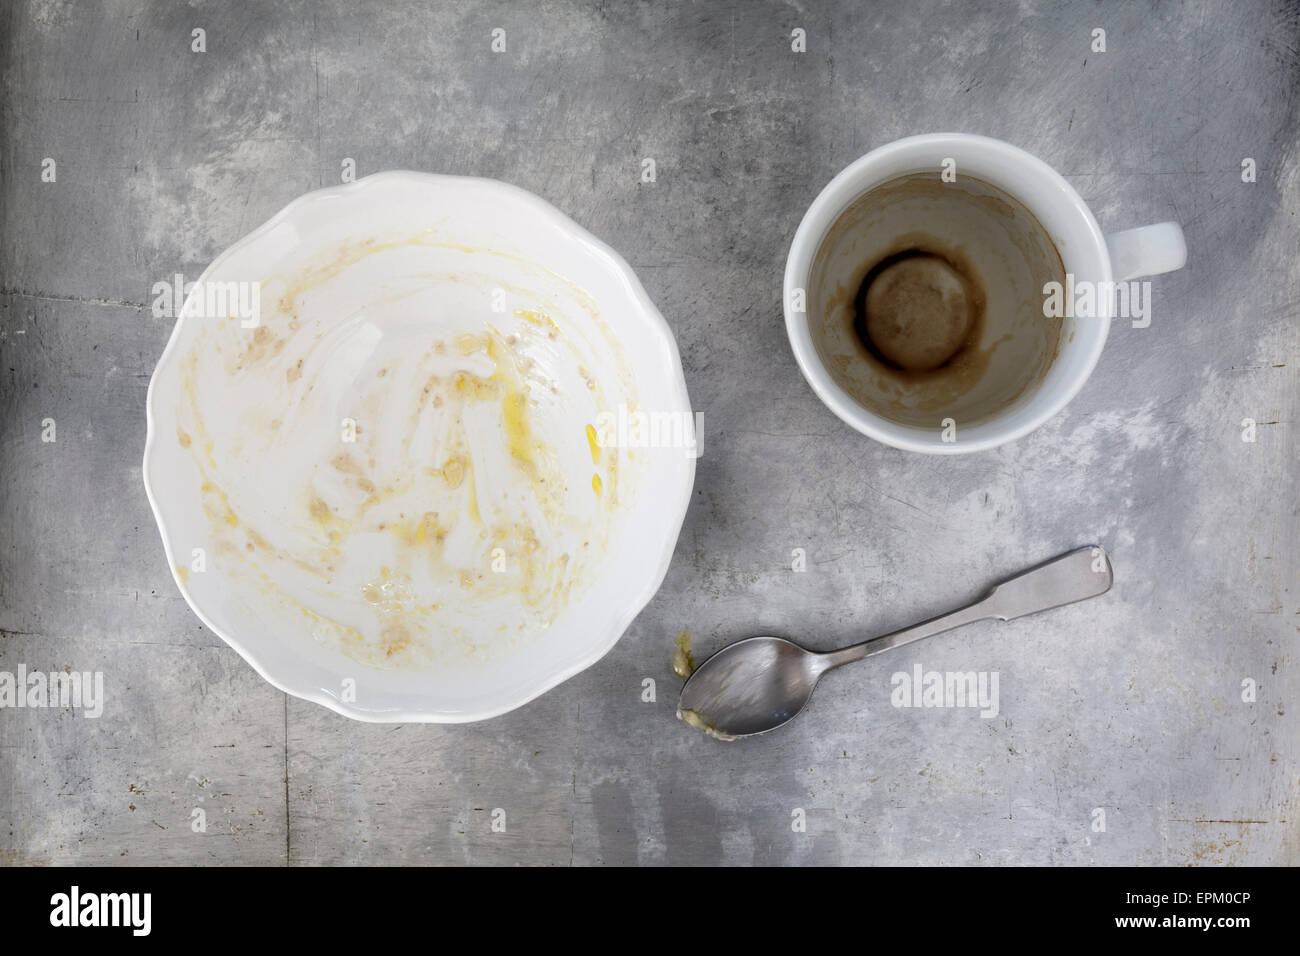 Finished breakfast with porridge and coffee remains Stock Photo